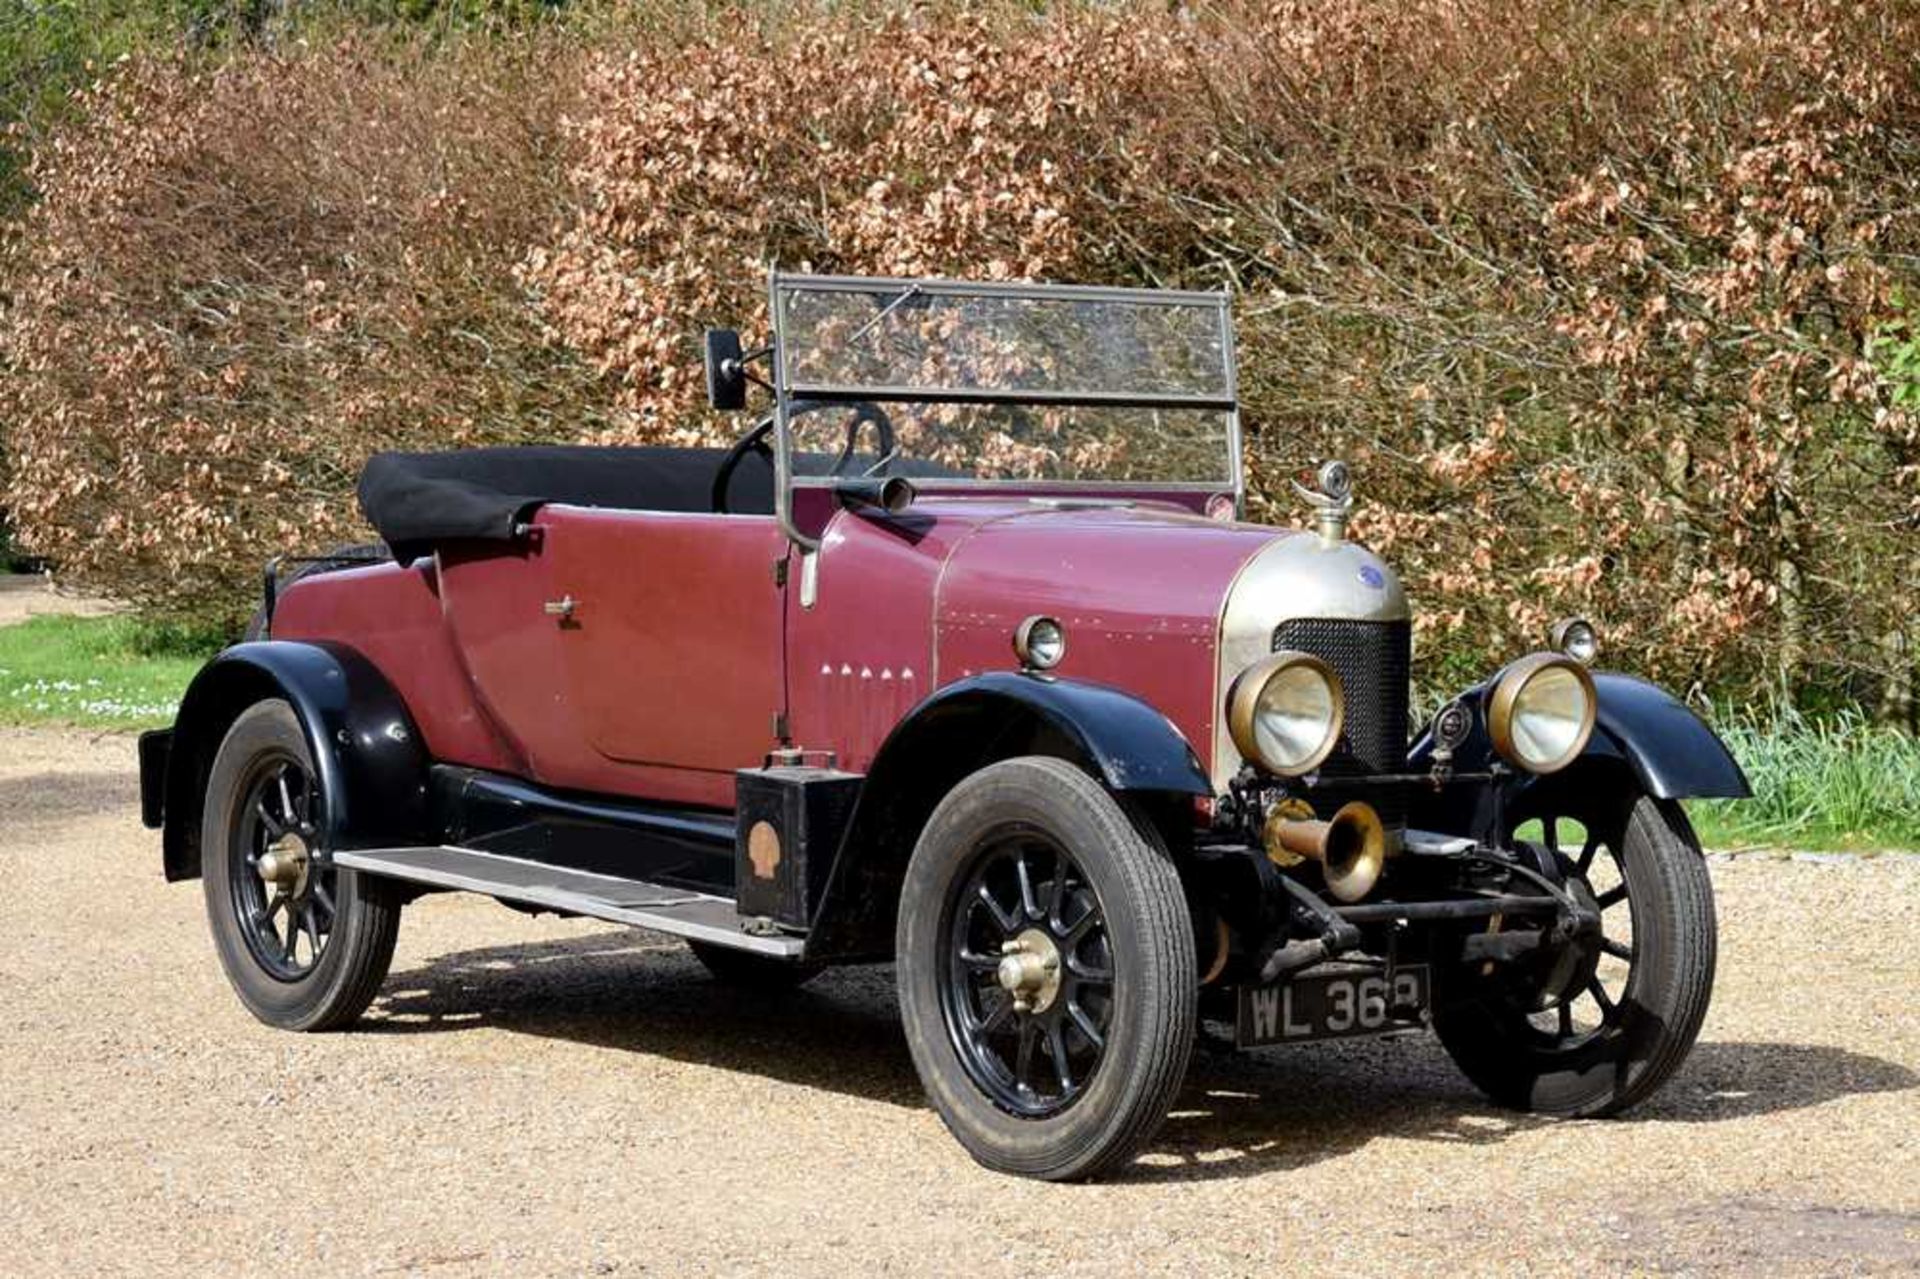 1926 Morris Oxford 'Bullnose' 2-Seat Tourer with Dickey - Image 14 of 99